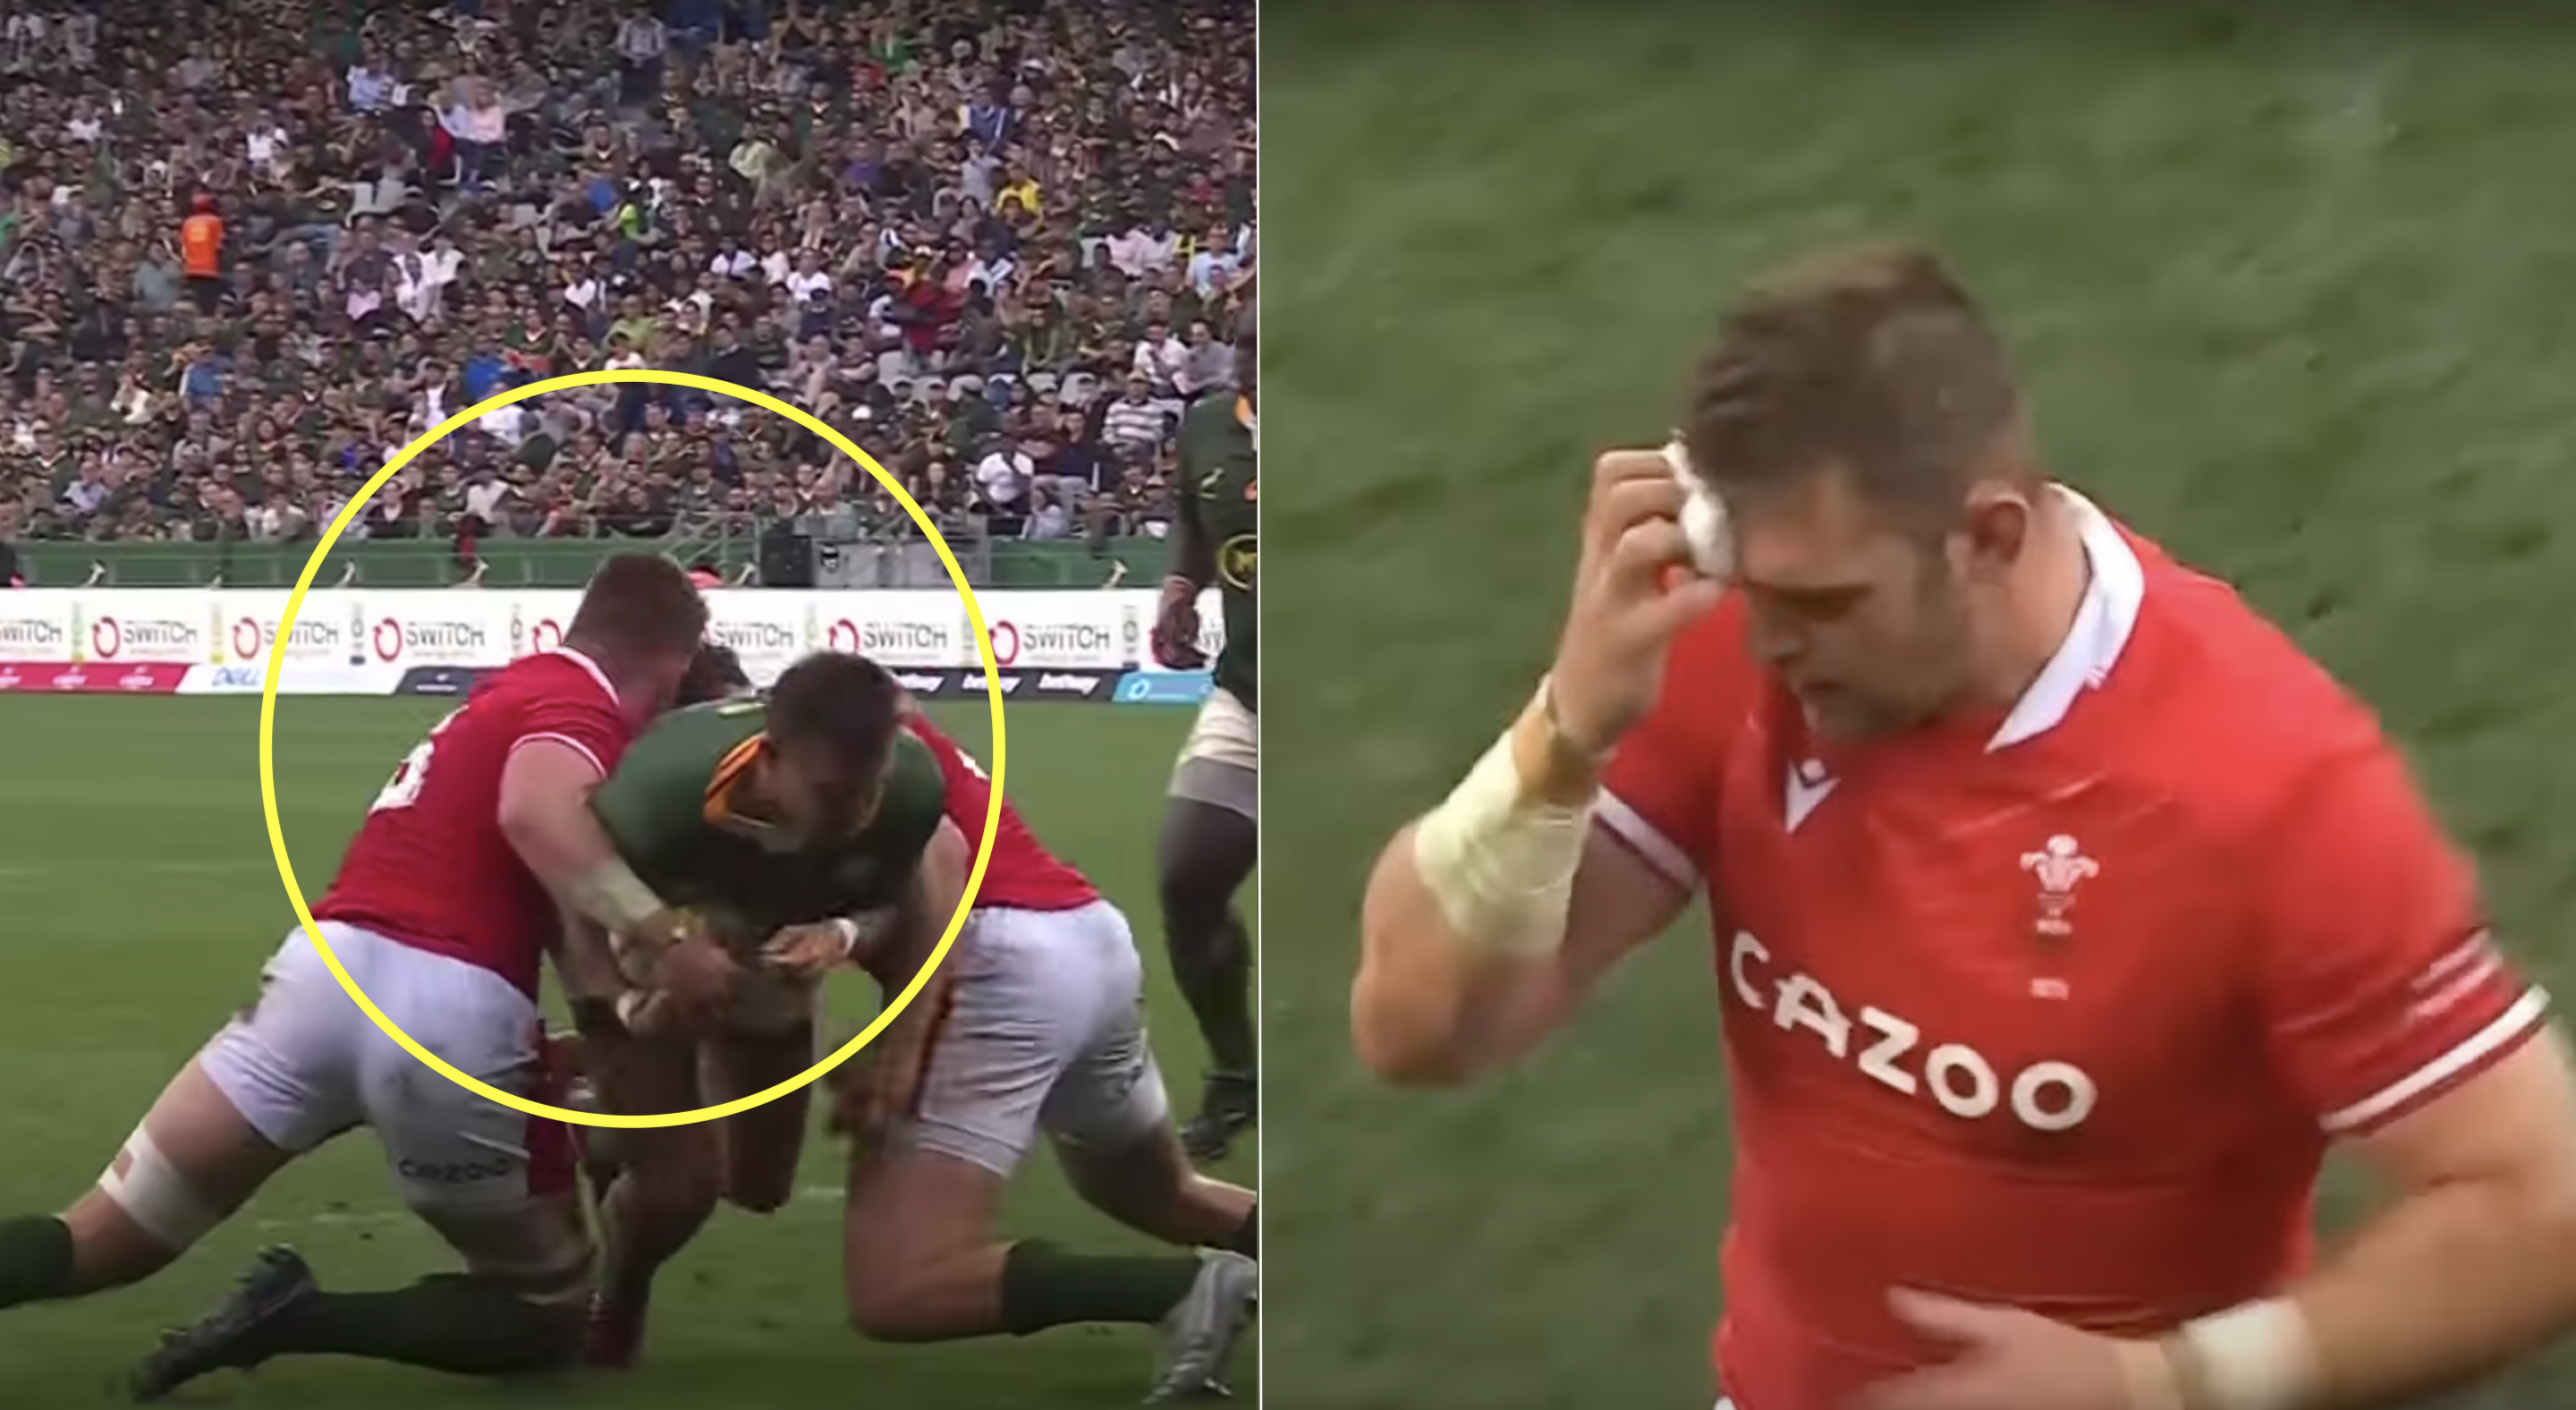 Dan Lydiate is barely recognisable after gruesome head clash against Boks